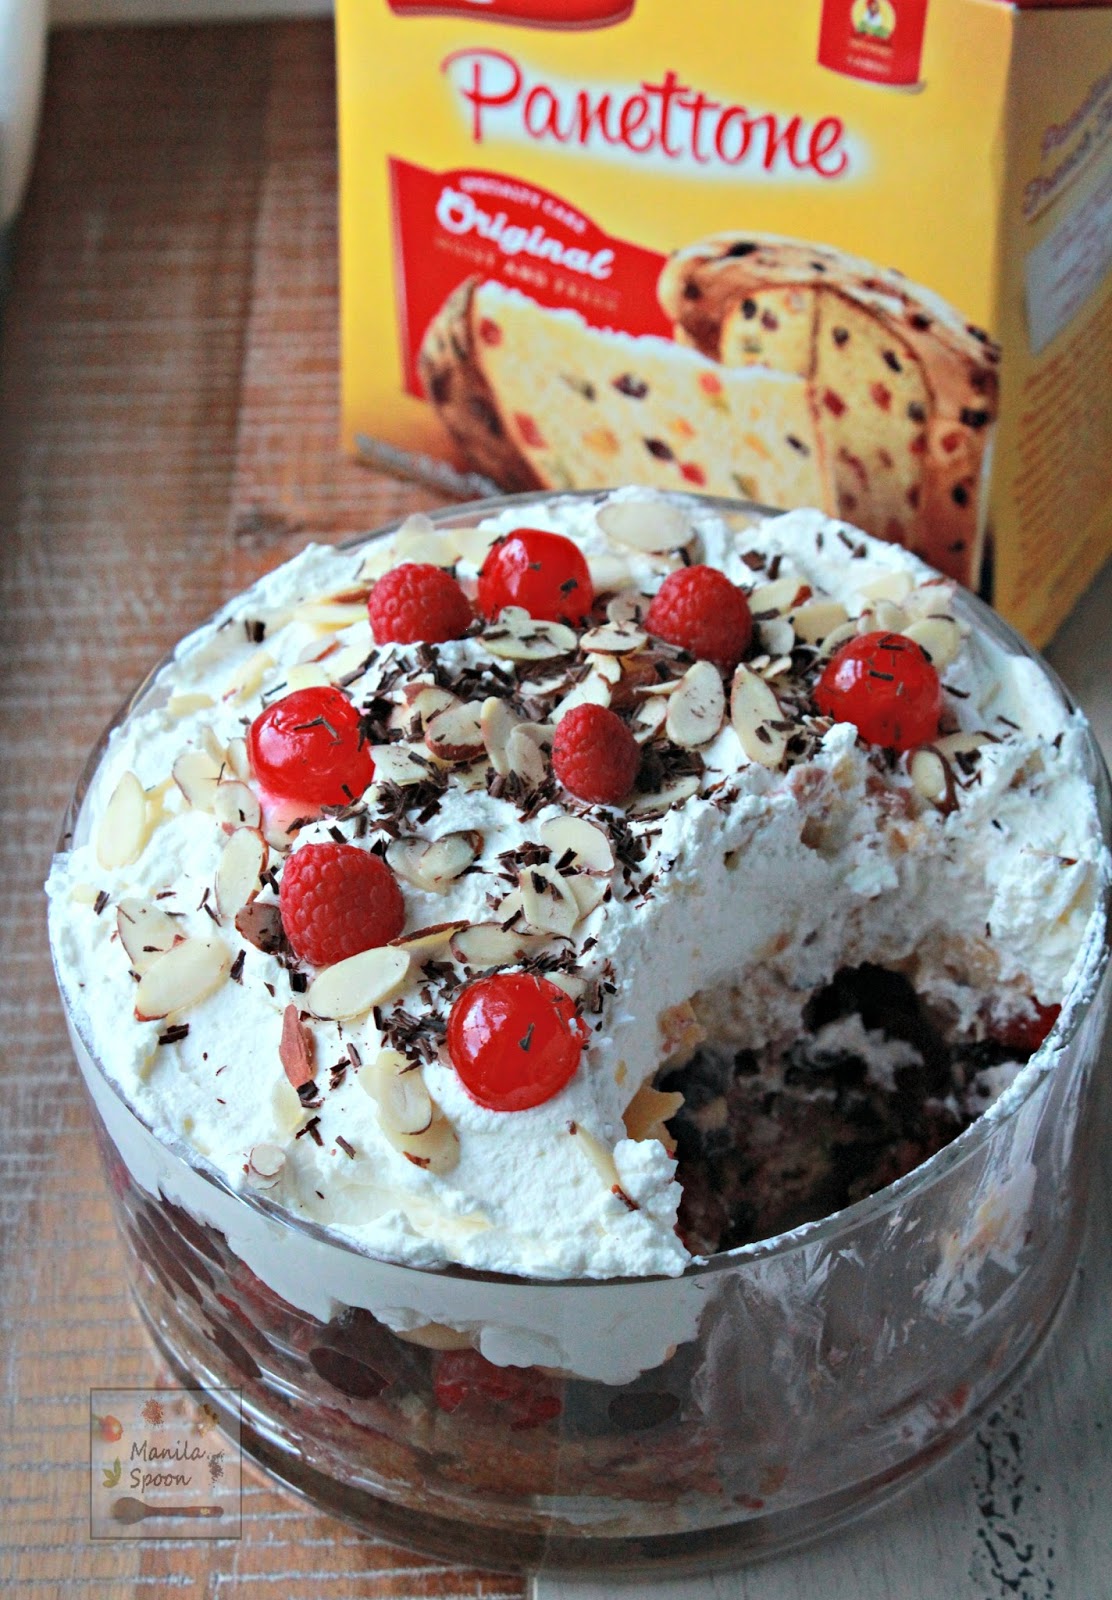 Freshly whipped cream, yummy custard, fruits plus Italian Panettone or any sponge cake make this a delicious and party-perfect Trifle!  Cherry, Raspberry and Panettone Trifle